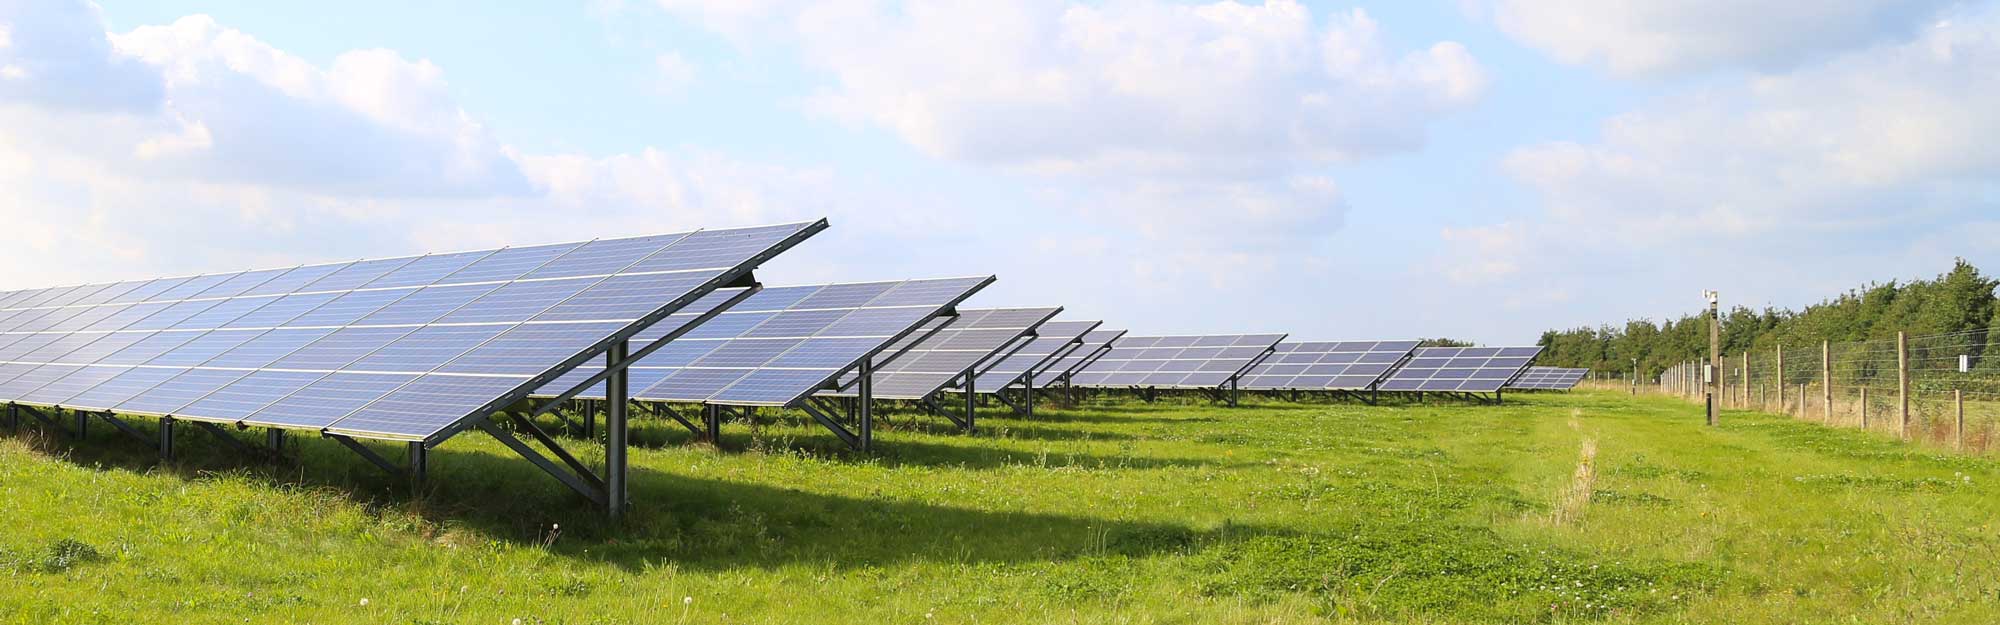 Want to voice your support for Ouse Valley Solar Farm?